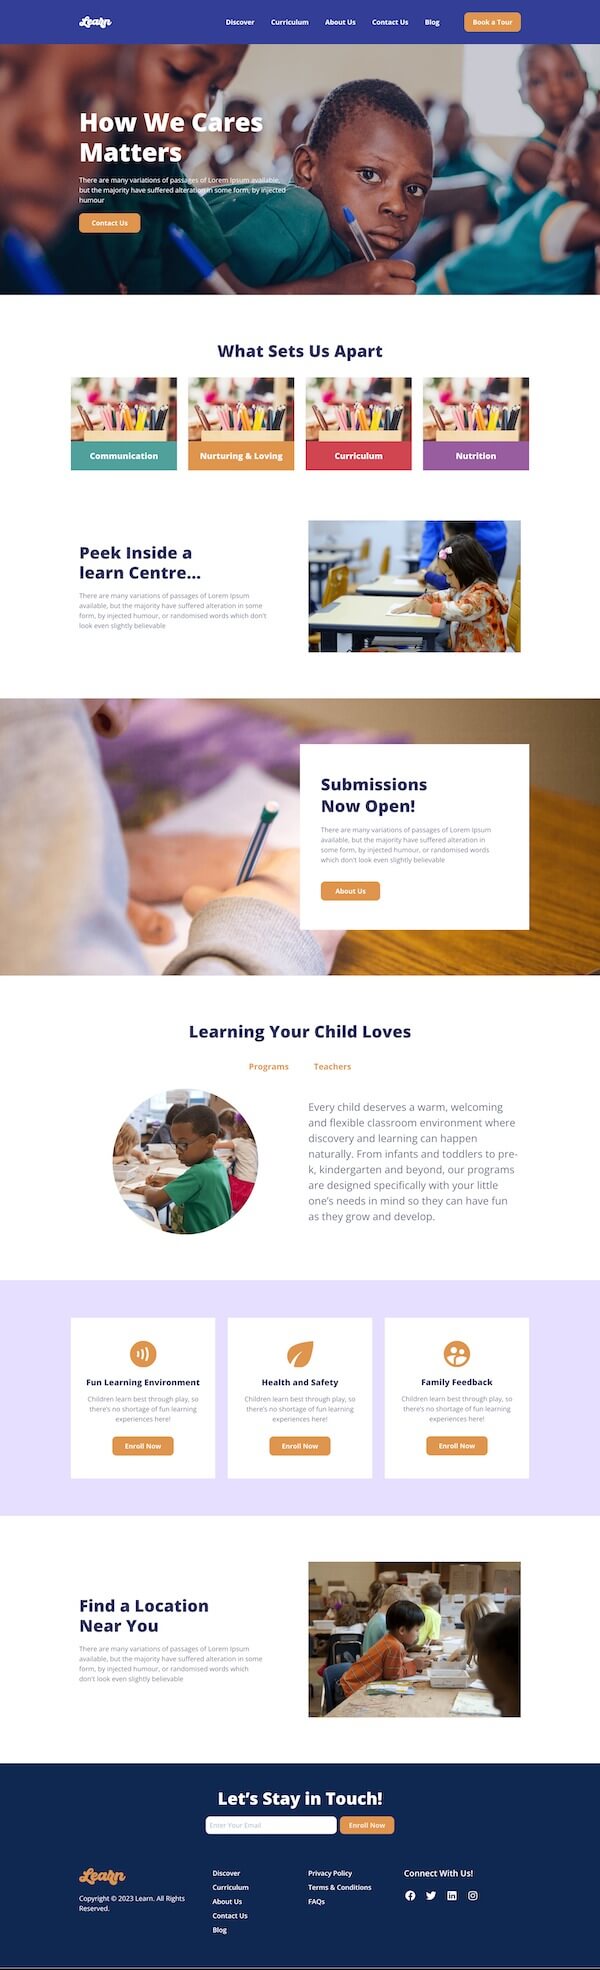 Child Day Care Website